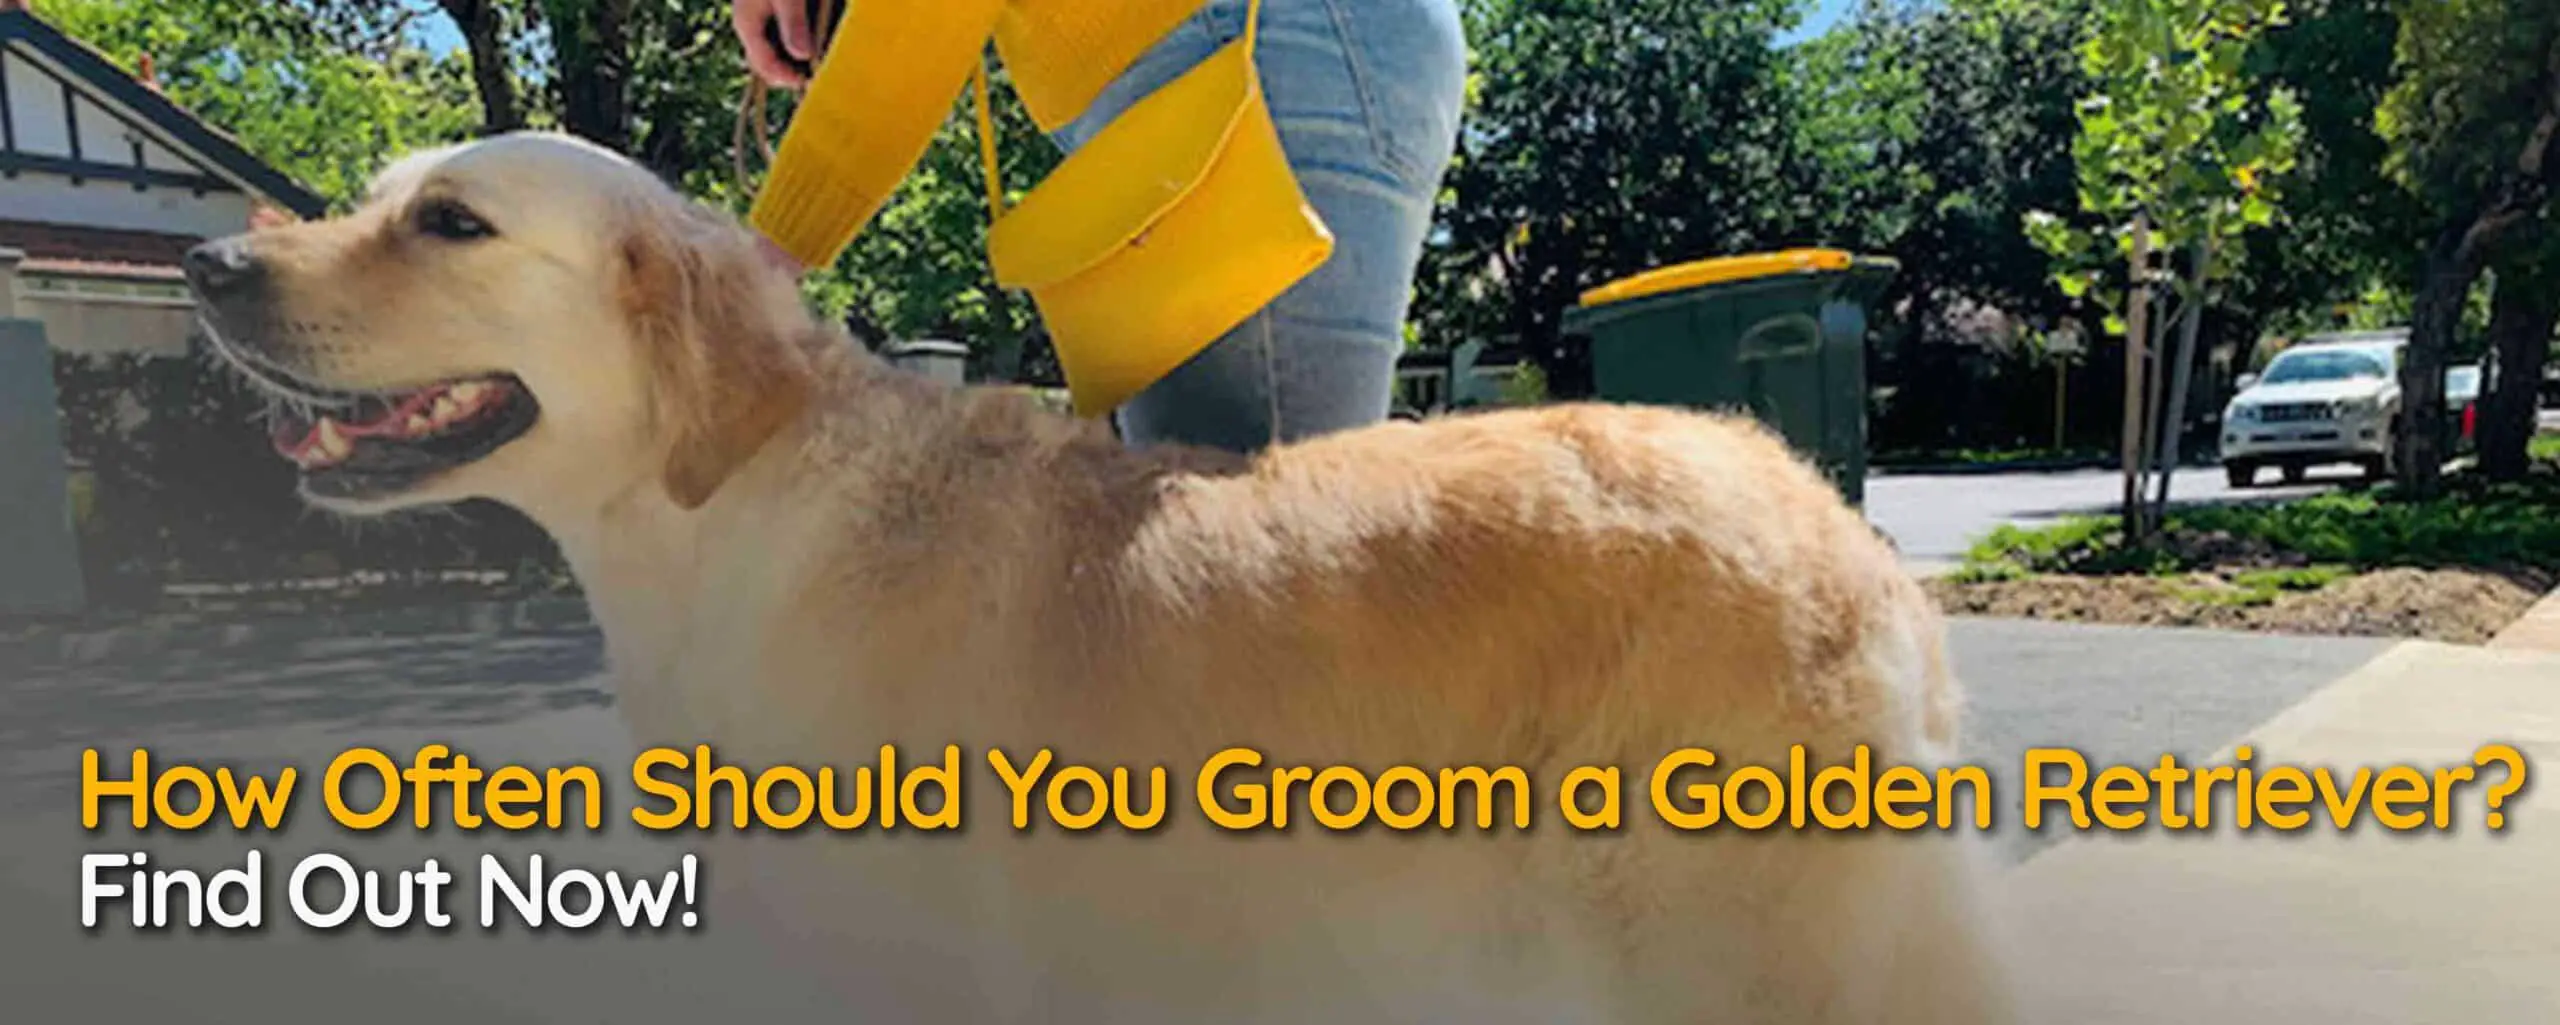 How Often Should You Groom a Golden Retriever? Find Out Now!